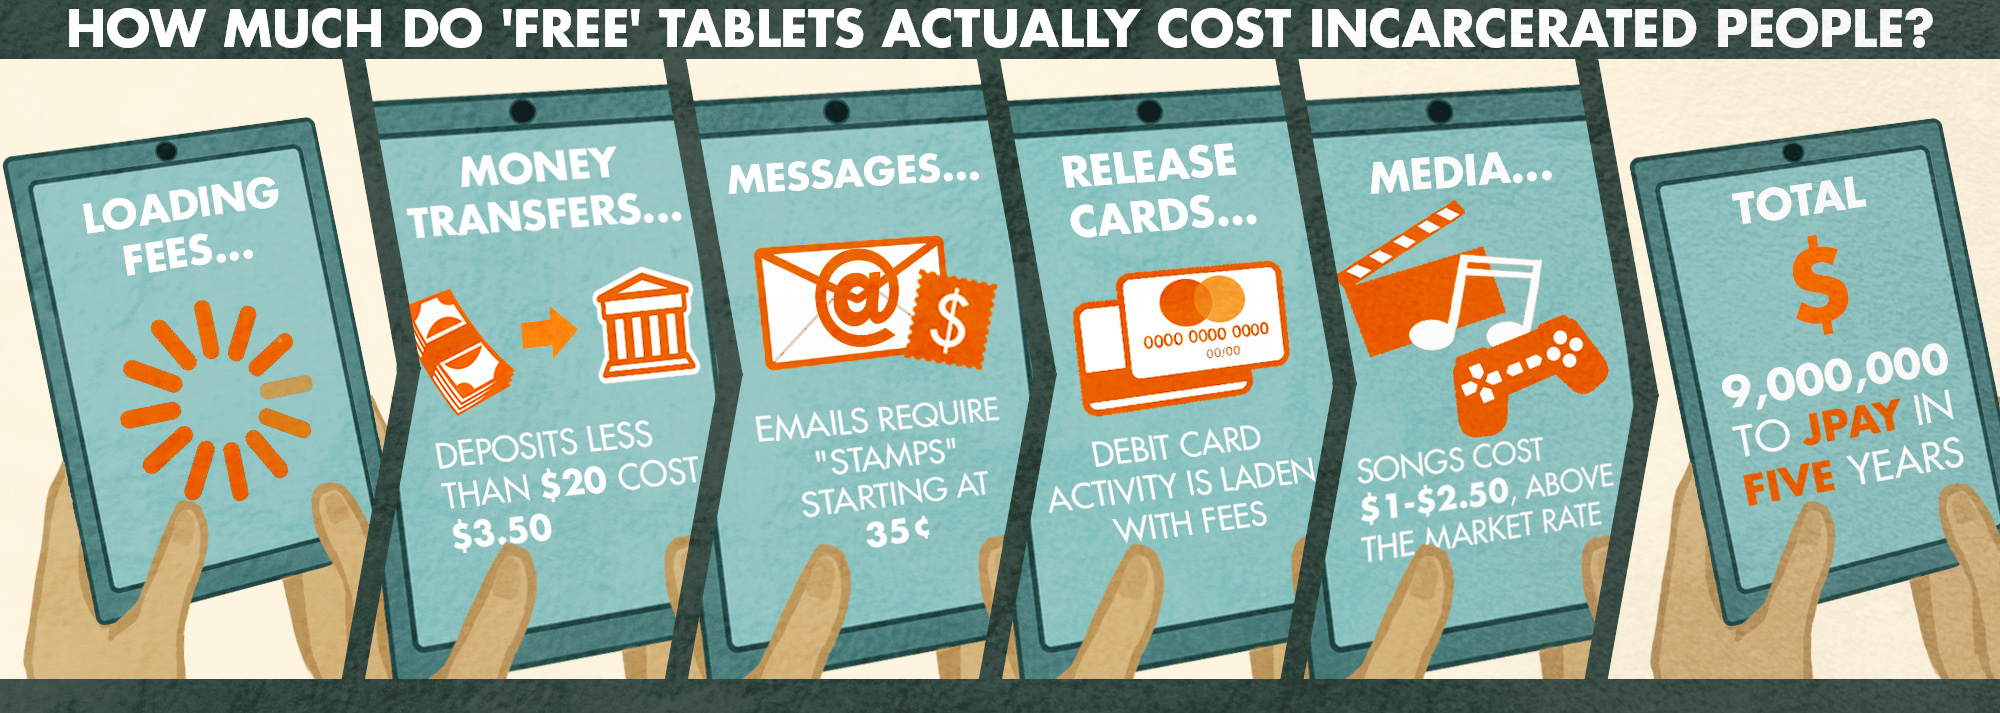 Illustration showing five different costs built into supposedly free tablets that are charged to incarcerated people, including loading fees, money transfer fees, electronic message fees, release card fees, and overpriced digital products